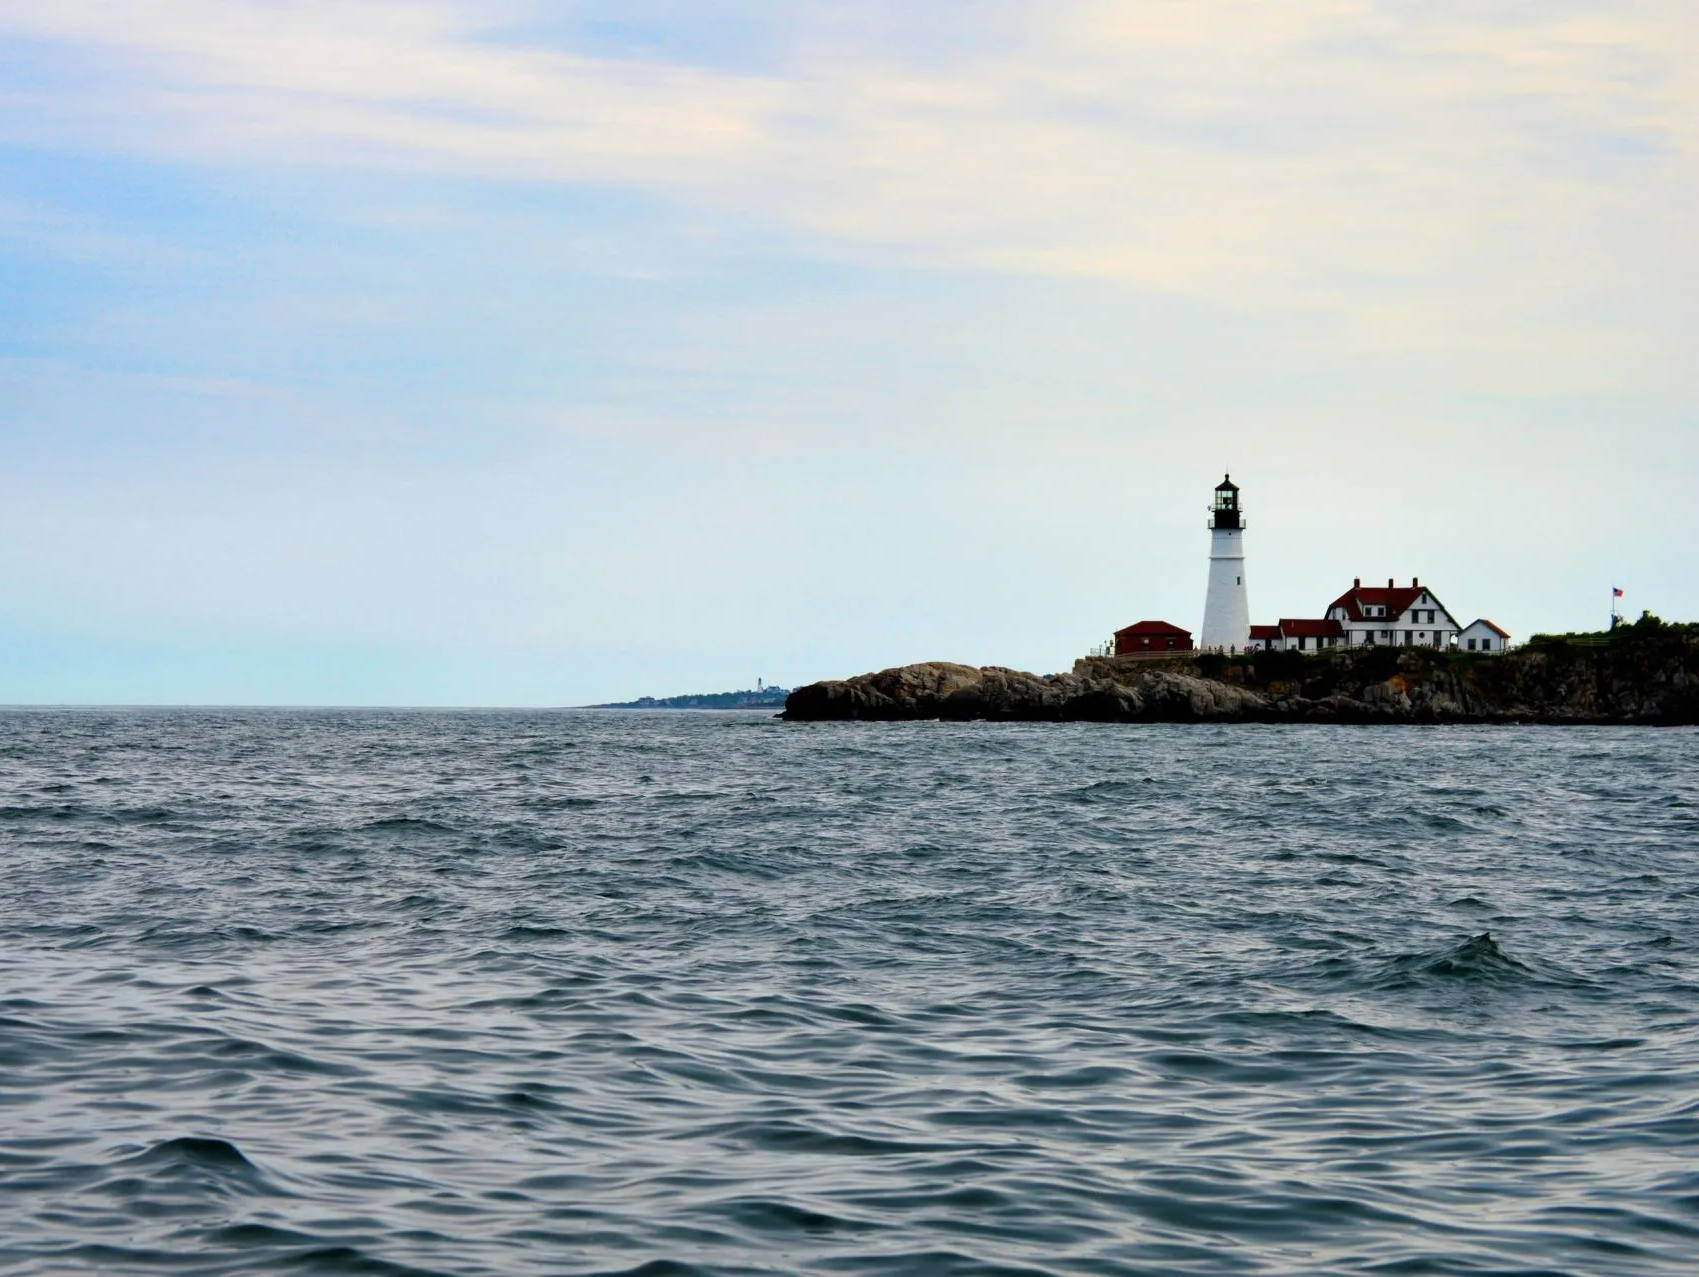 A wide shot of the Portland Headlight Lighthouse and the ocean